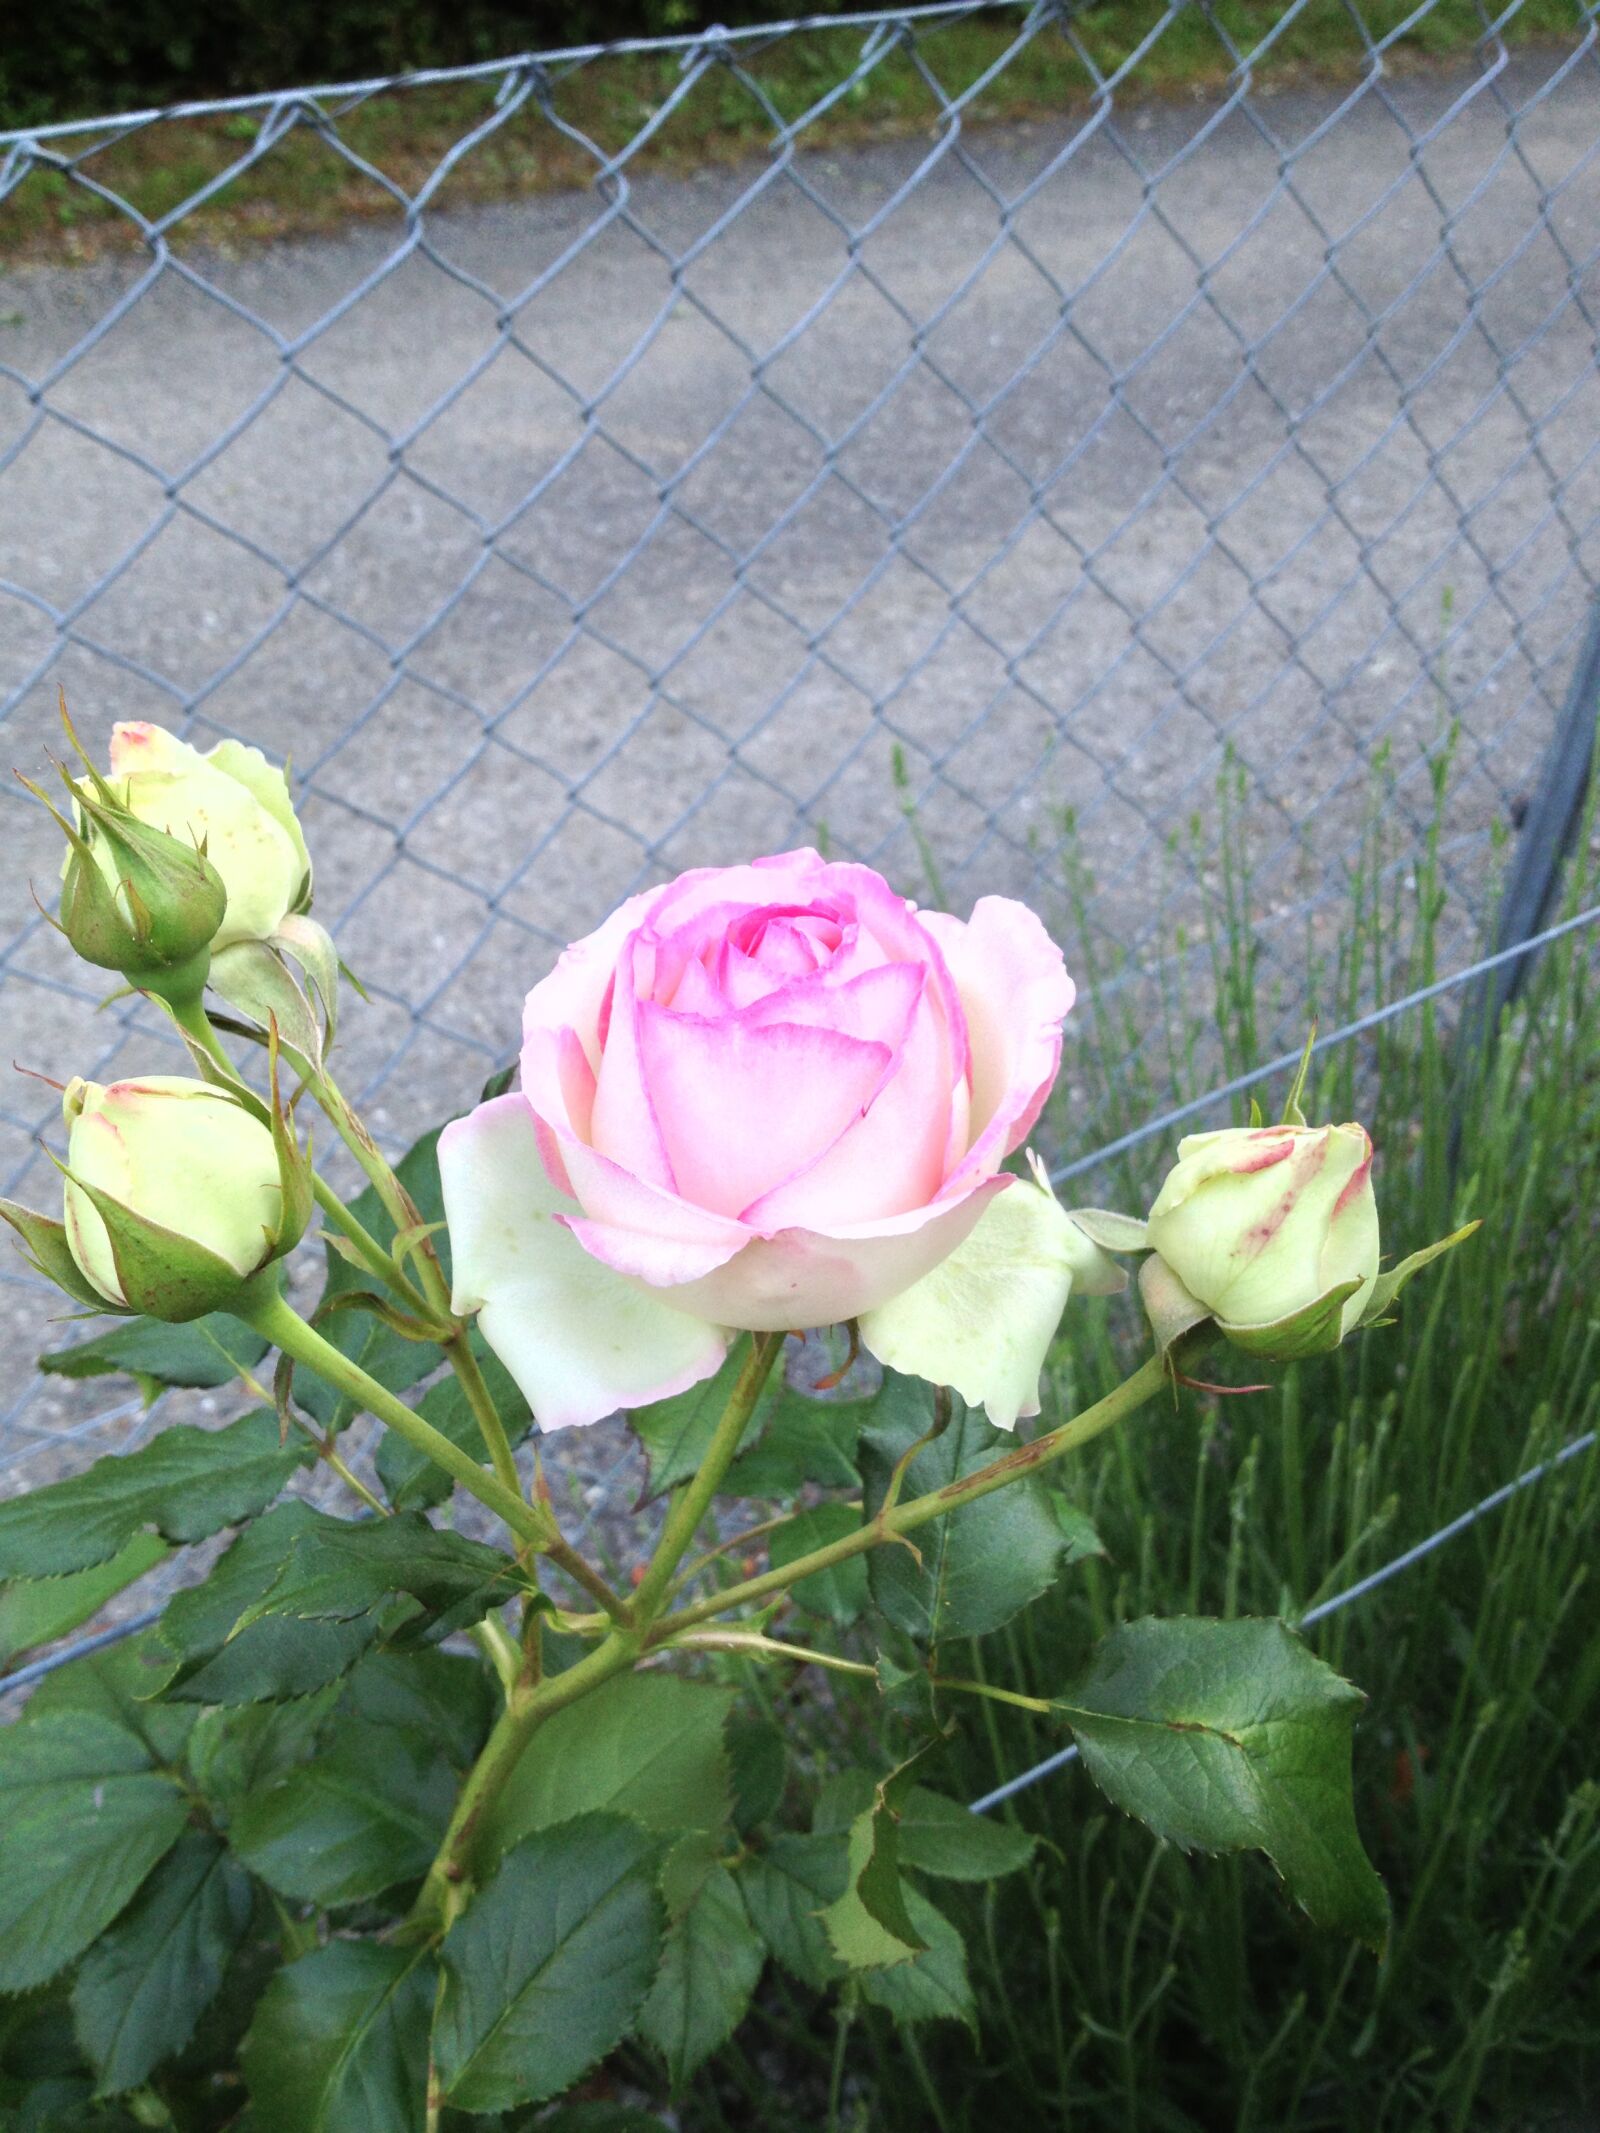 Apple iPhone 4S sample photo. Rose, plant, nature photography